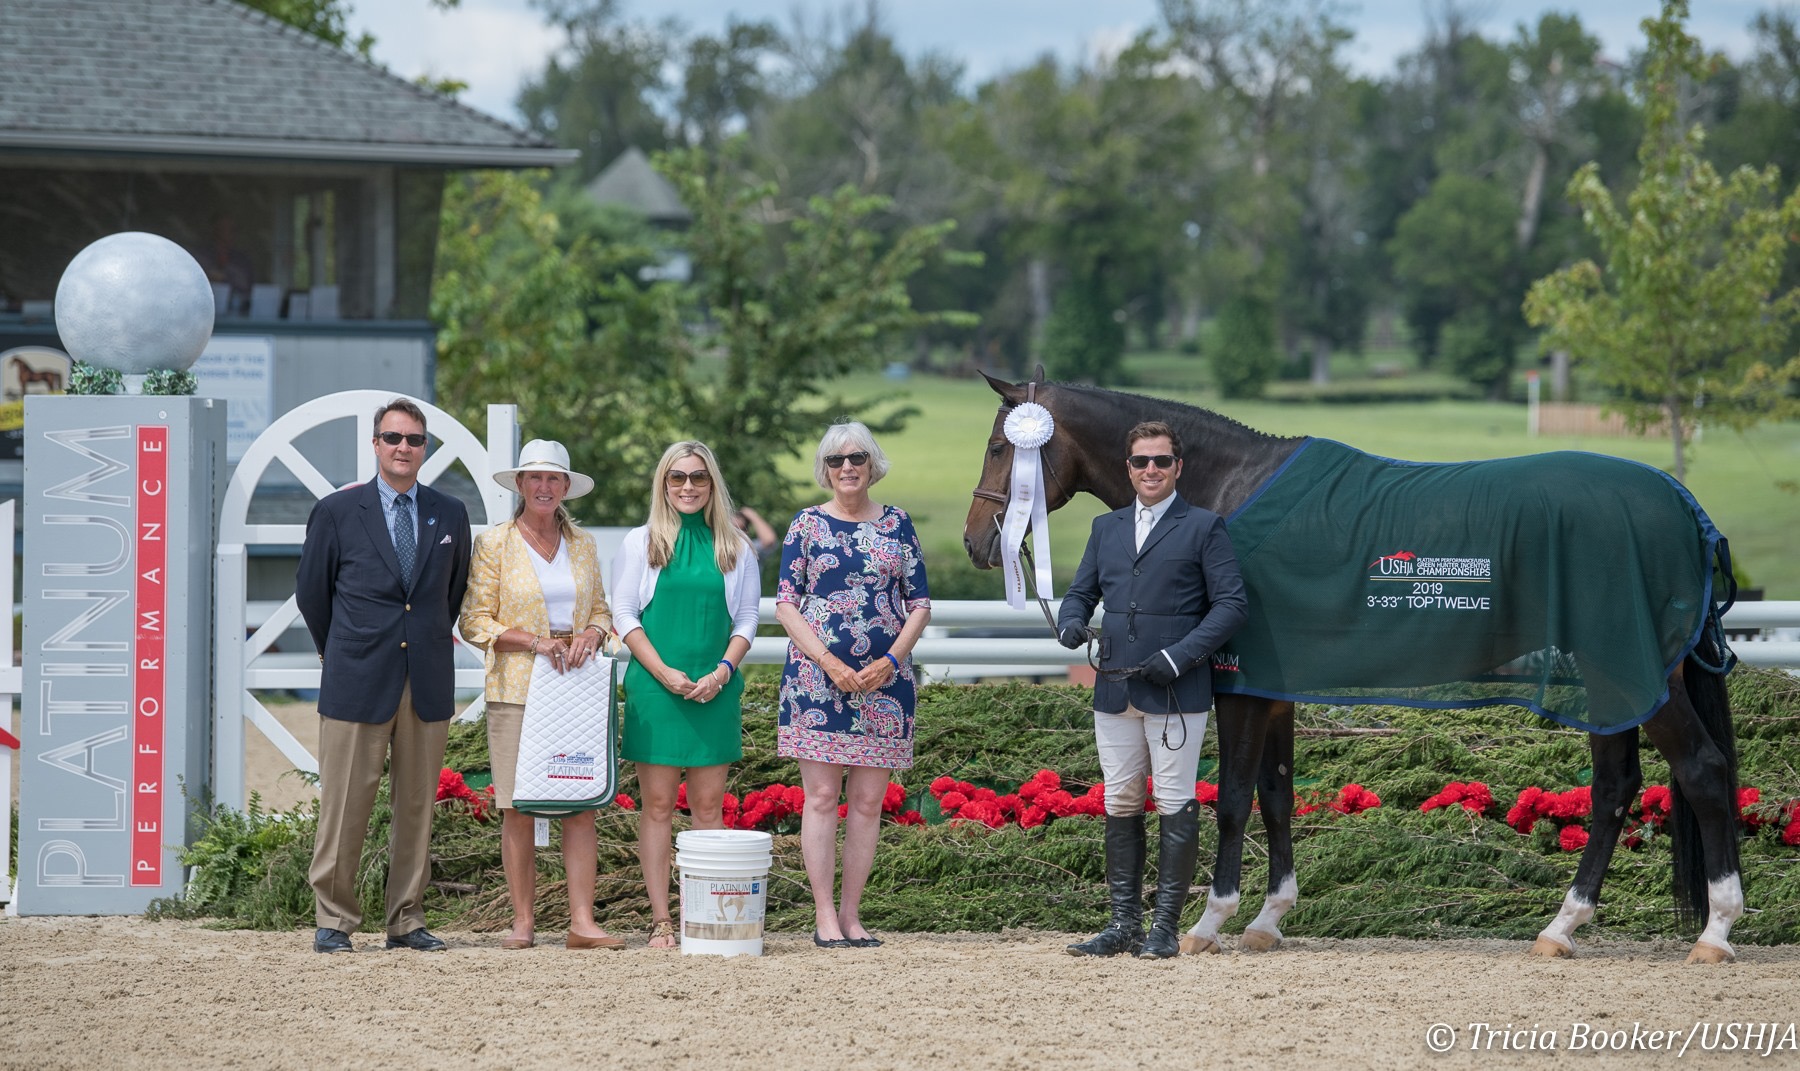 Reese’s, 4th overall Green Incentive finals, and highest placed horse from the 3”3 section overall out of 175+ horses. Photo: Tricia Booker/USHJA.